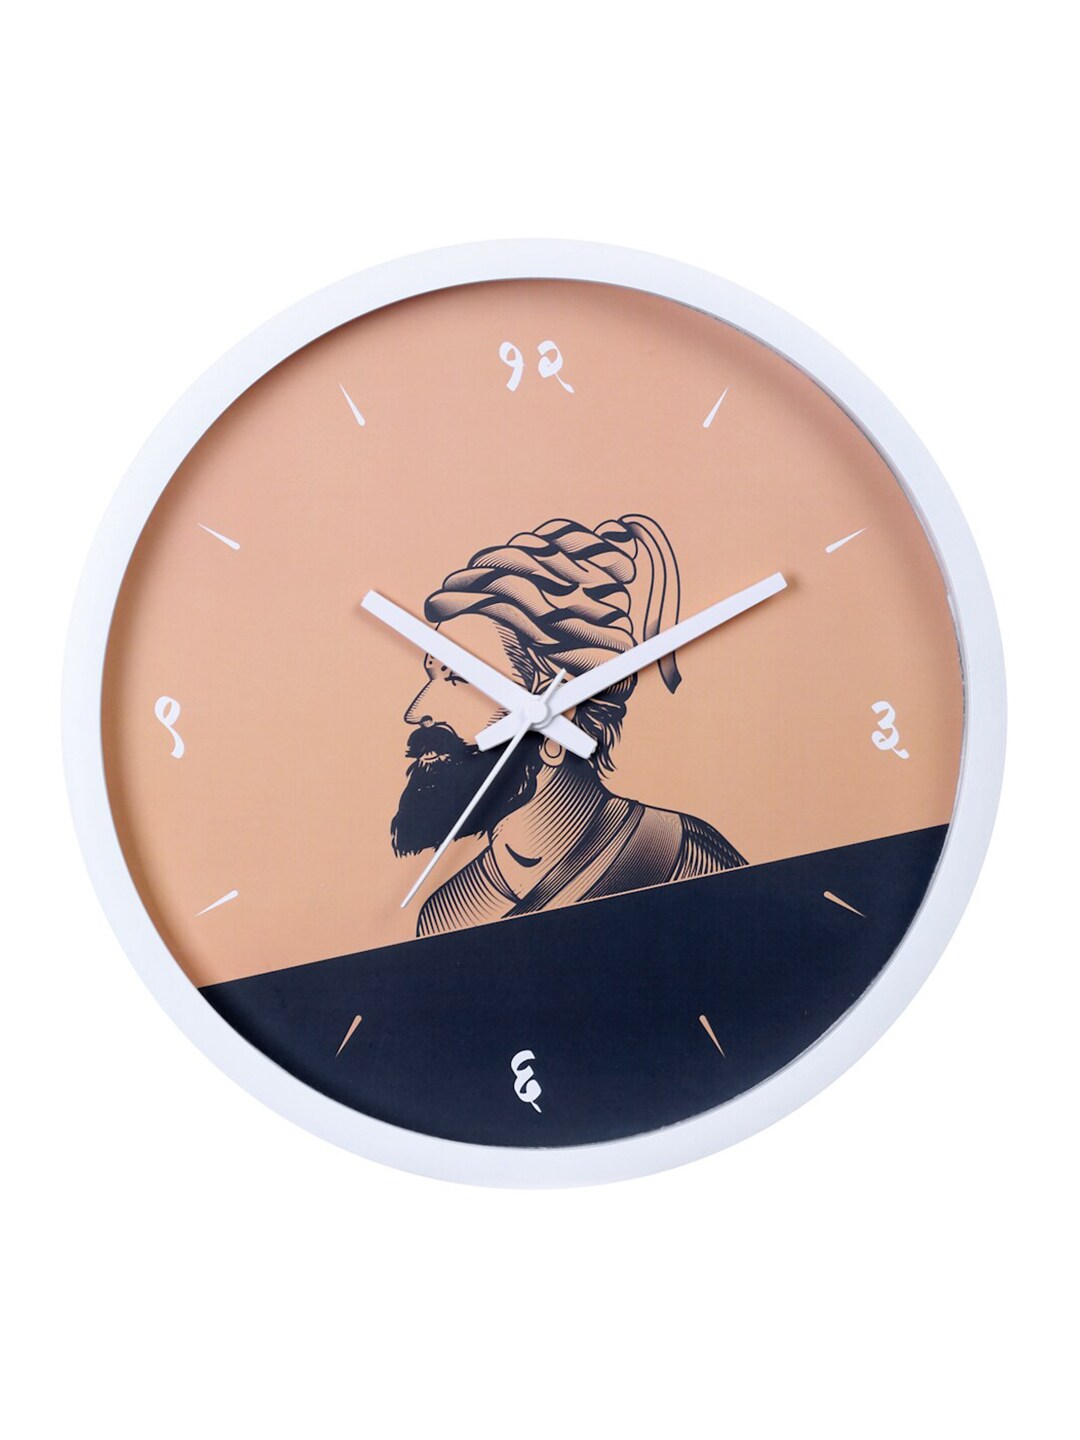 Bodh Design Orange & Navy Blue Printed Traditional Wall Clock Price in India